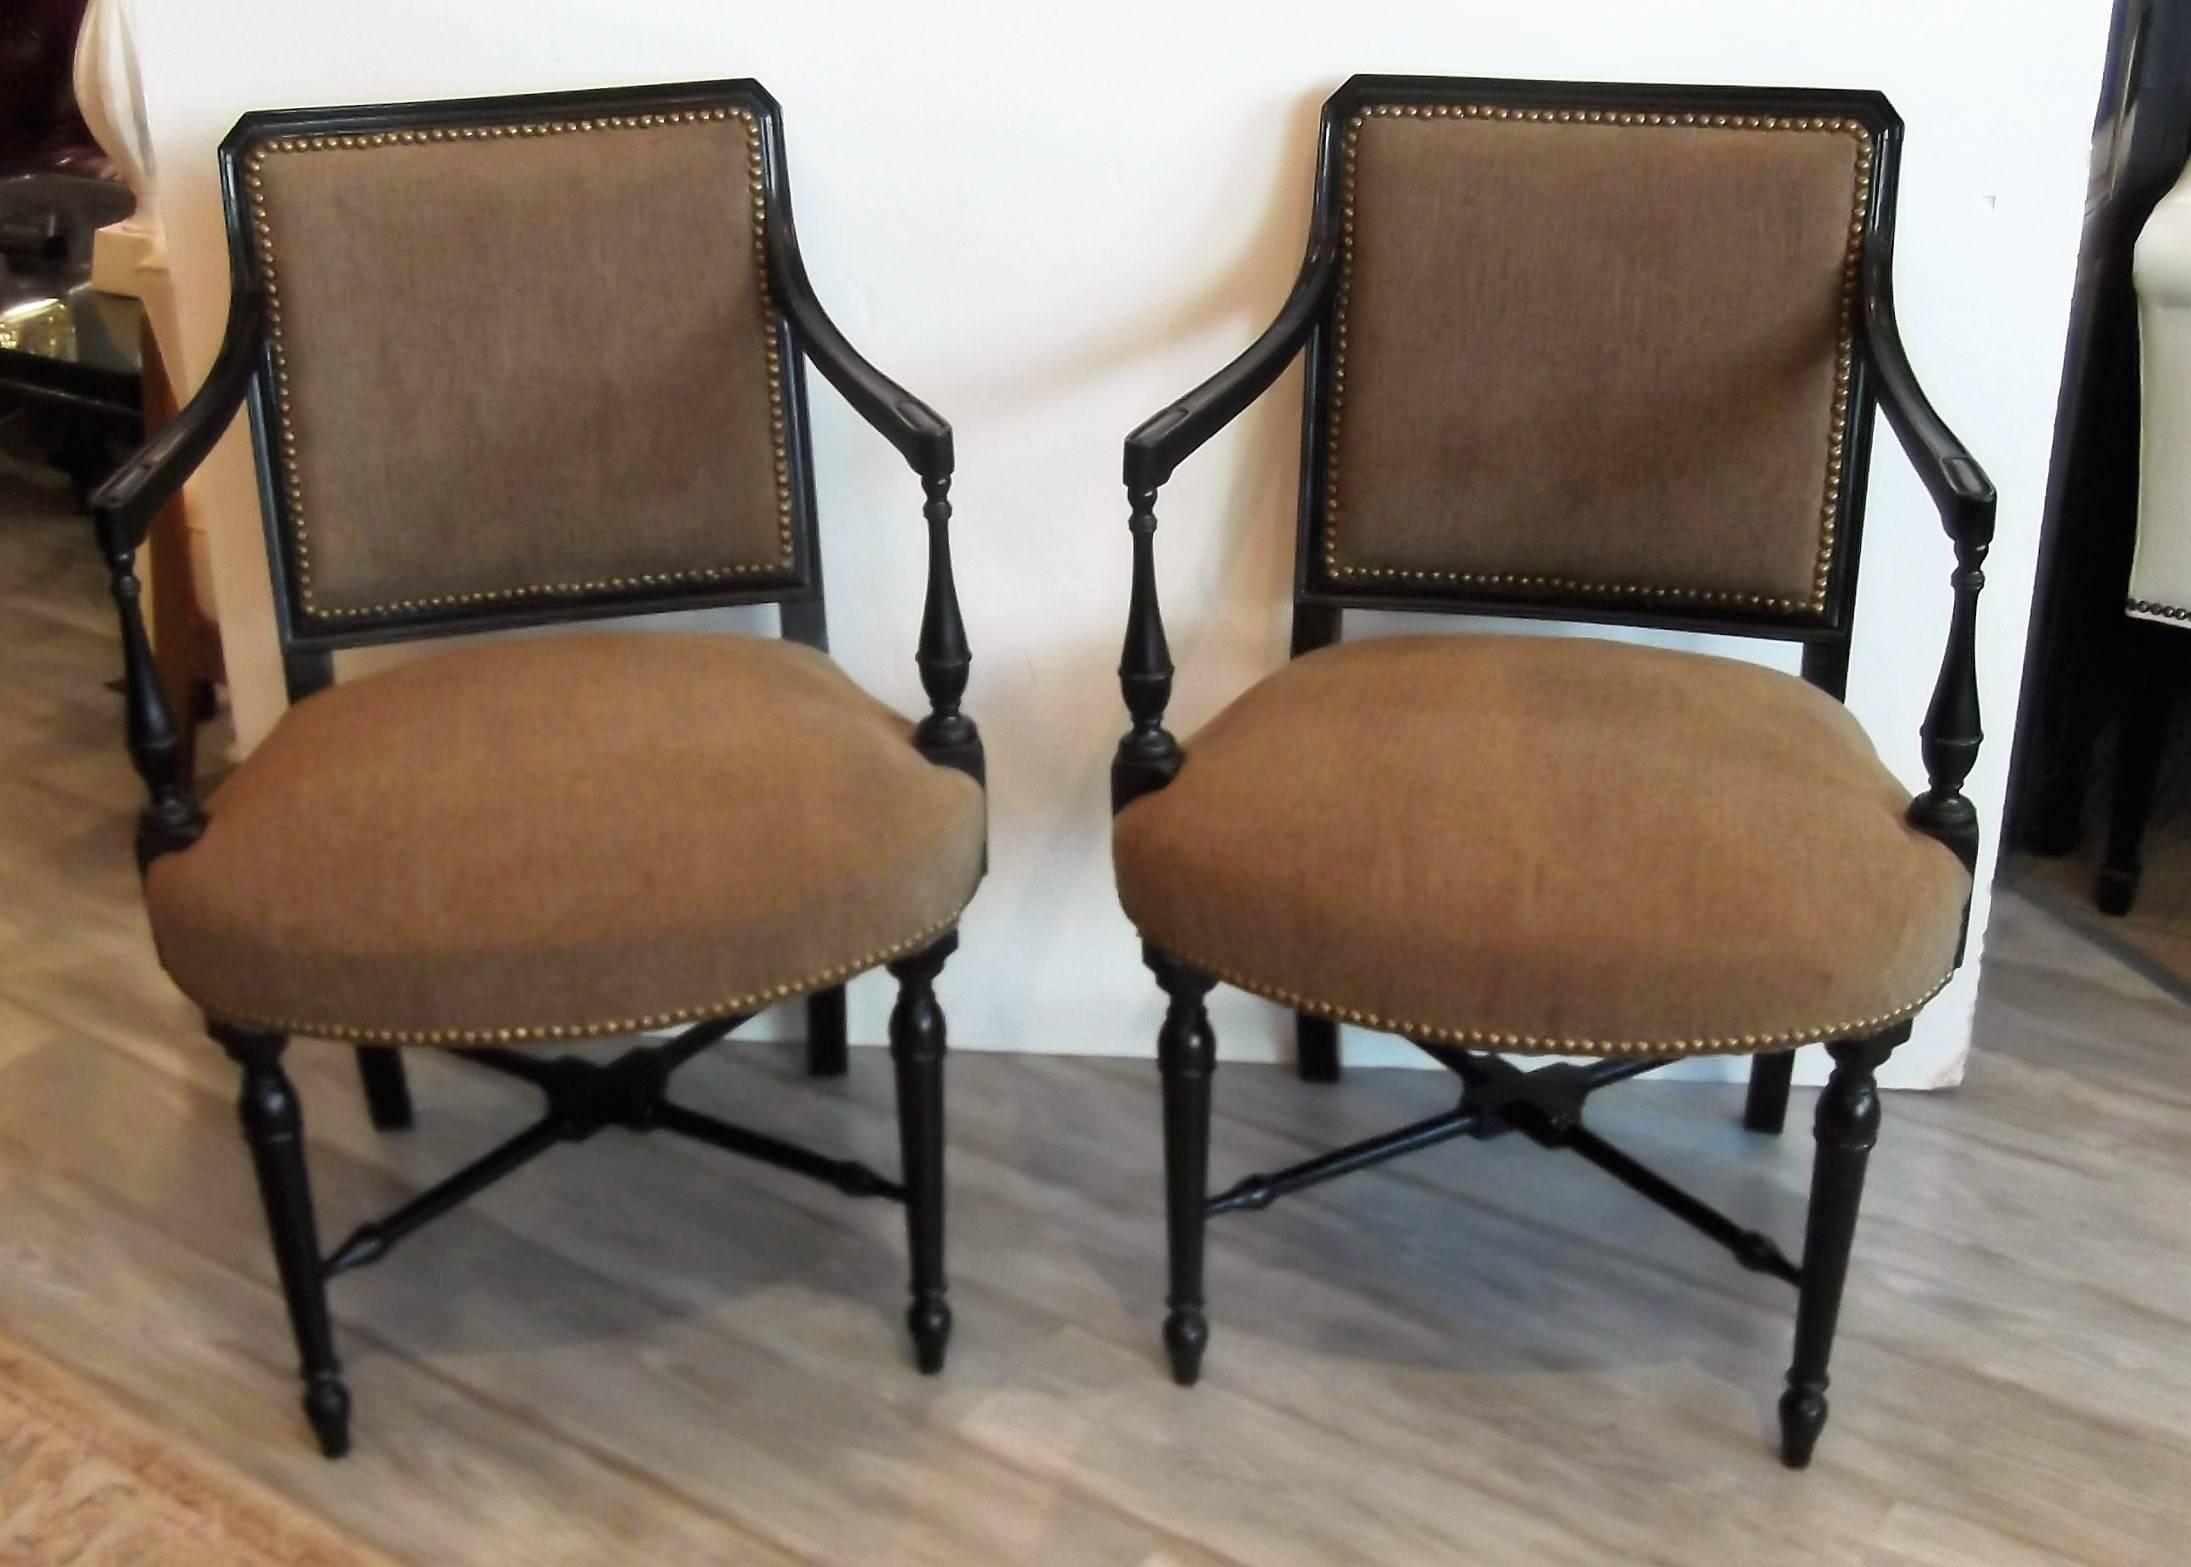 A pair of smaller ebonized armchairs with neutral olive-tan chenille upholstery. The sturdy wood frame with ebony finish is trimmed with antiqued brass nailhead trim. Nicely turned legs and X-stretcher base and slightly sloping arms.